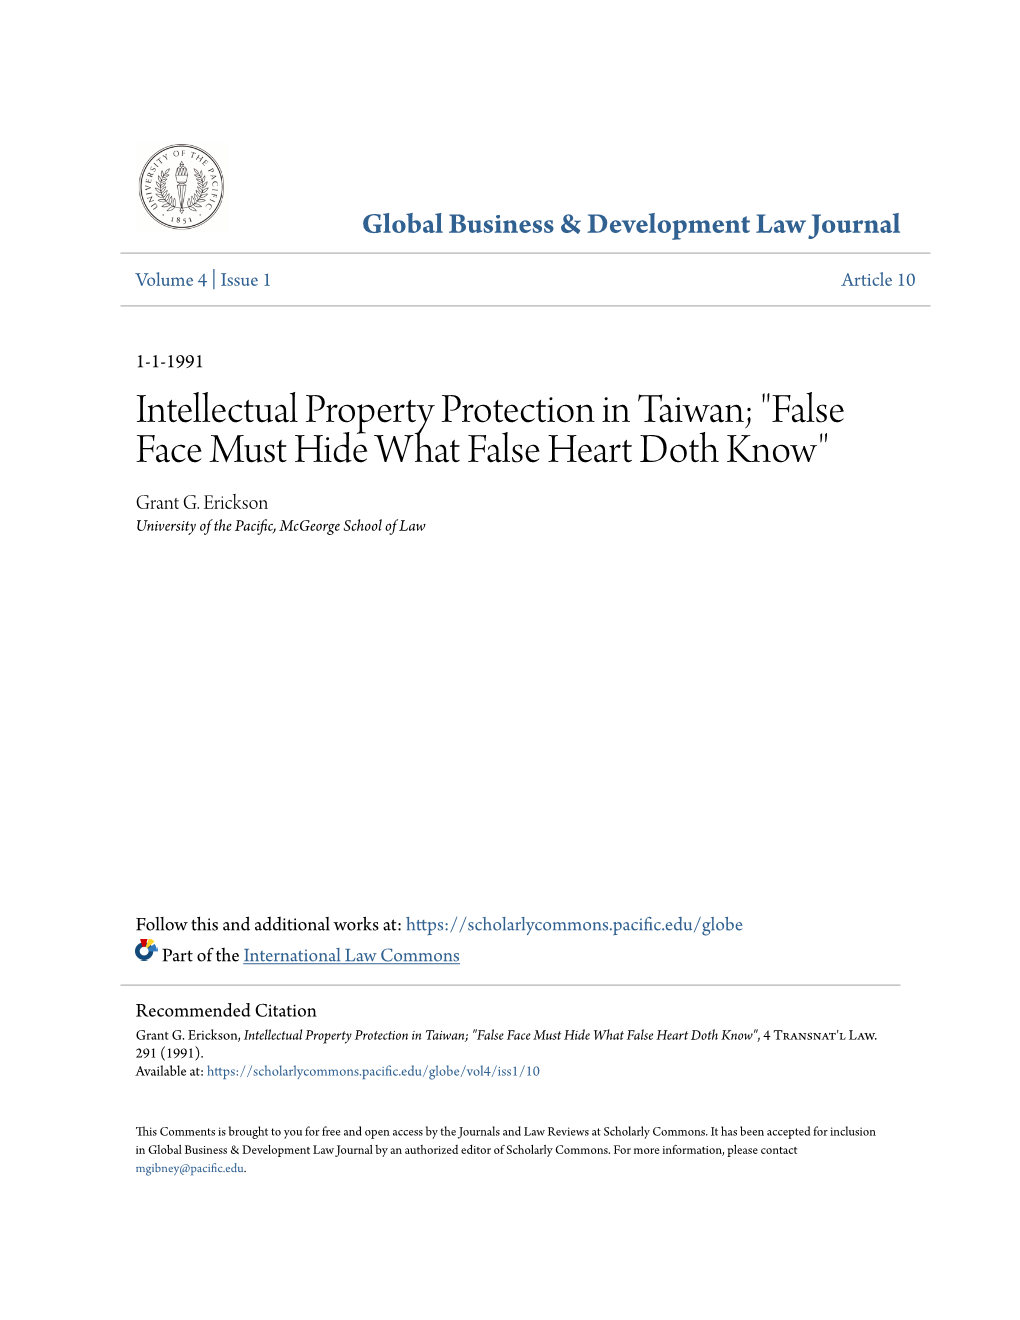 Intellectual Property Protection in Taiwan; "False Face Must Hide What False Heart Doth Know" Grant G